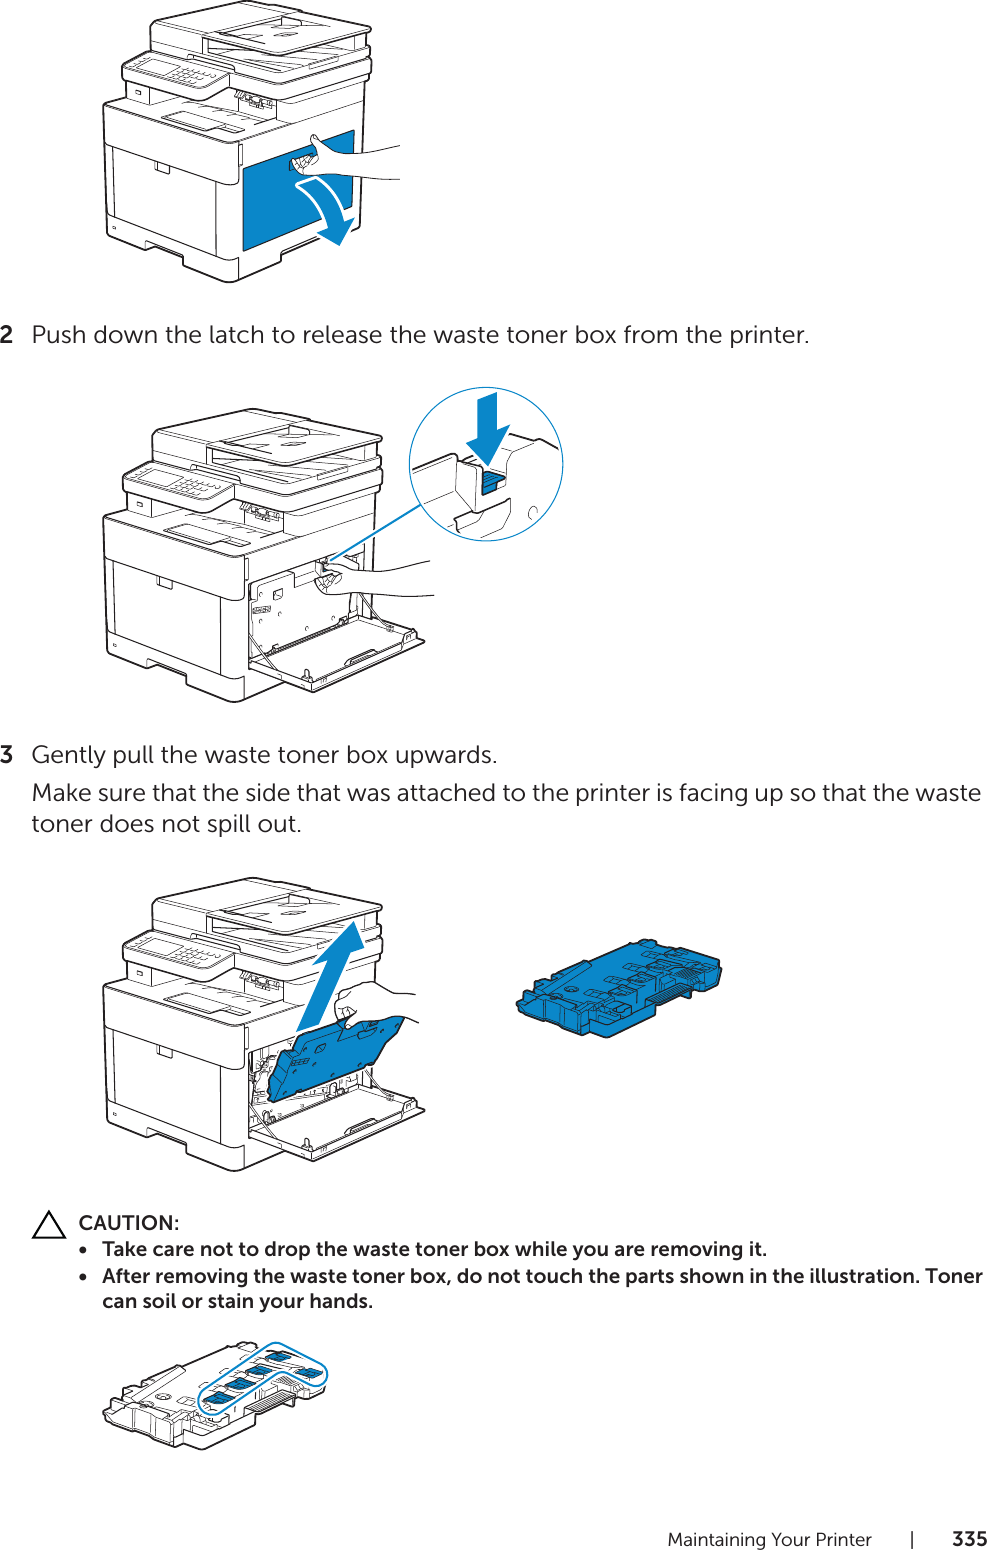 Maintaining Your Printer |3352Push down the latch to release the waste toner box from the printer.3Gently pull the waste toner box upwards.Make sure that the side that was attached to the printer is facing up so that the waste toner does not spill out.CAUTION:• Take care not to drop the waste toner box while you are removing it.• After removing the waste toner box, do not touch the parts shown in the illustration. Toner can soil or stain your hands.